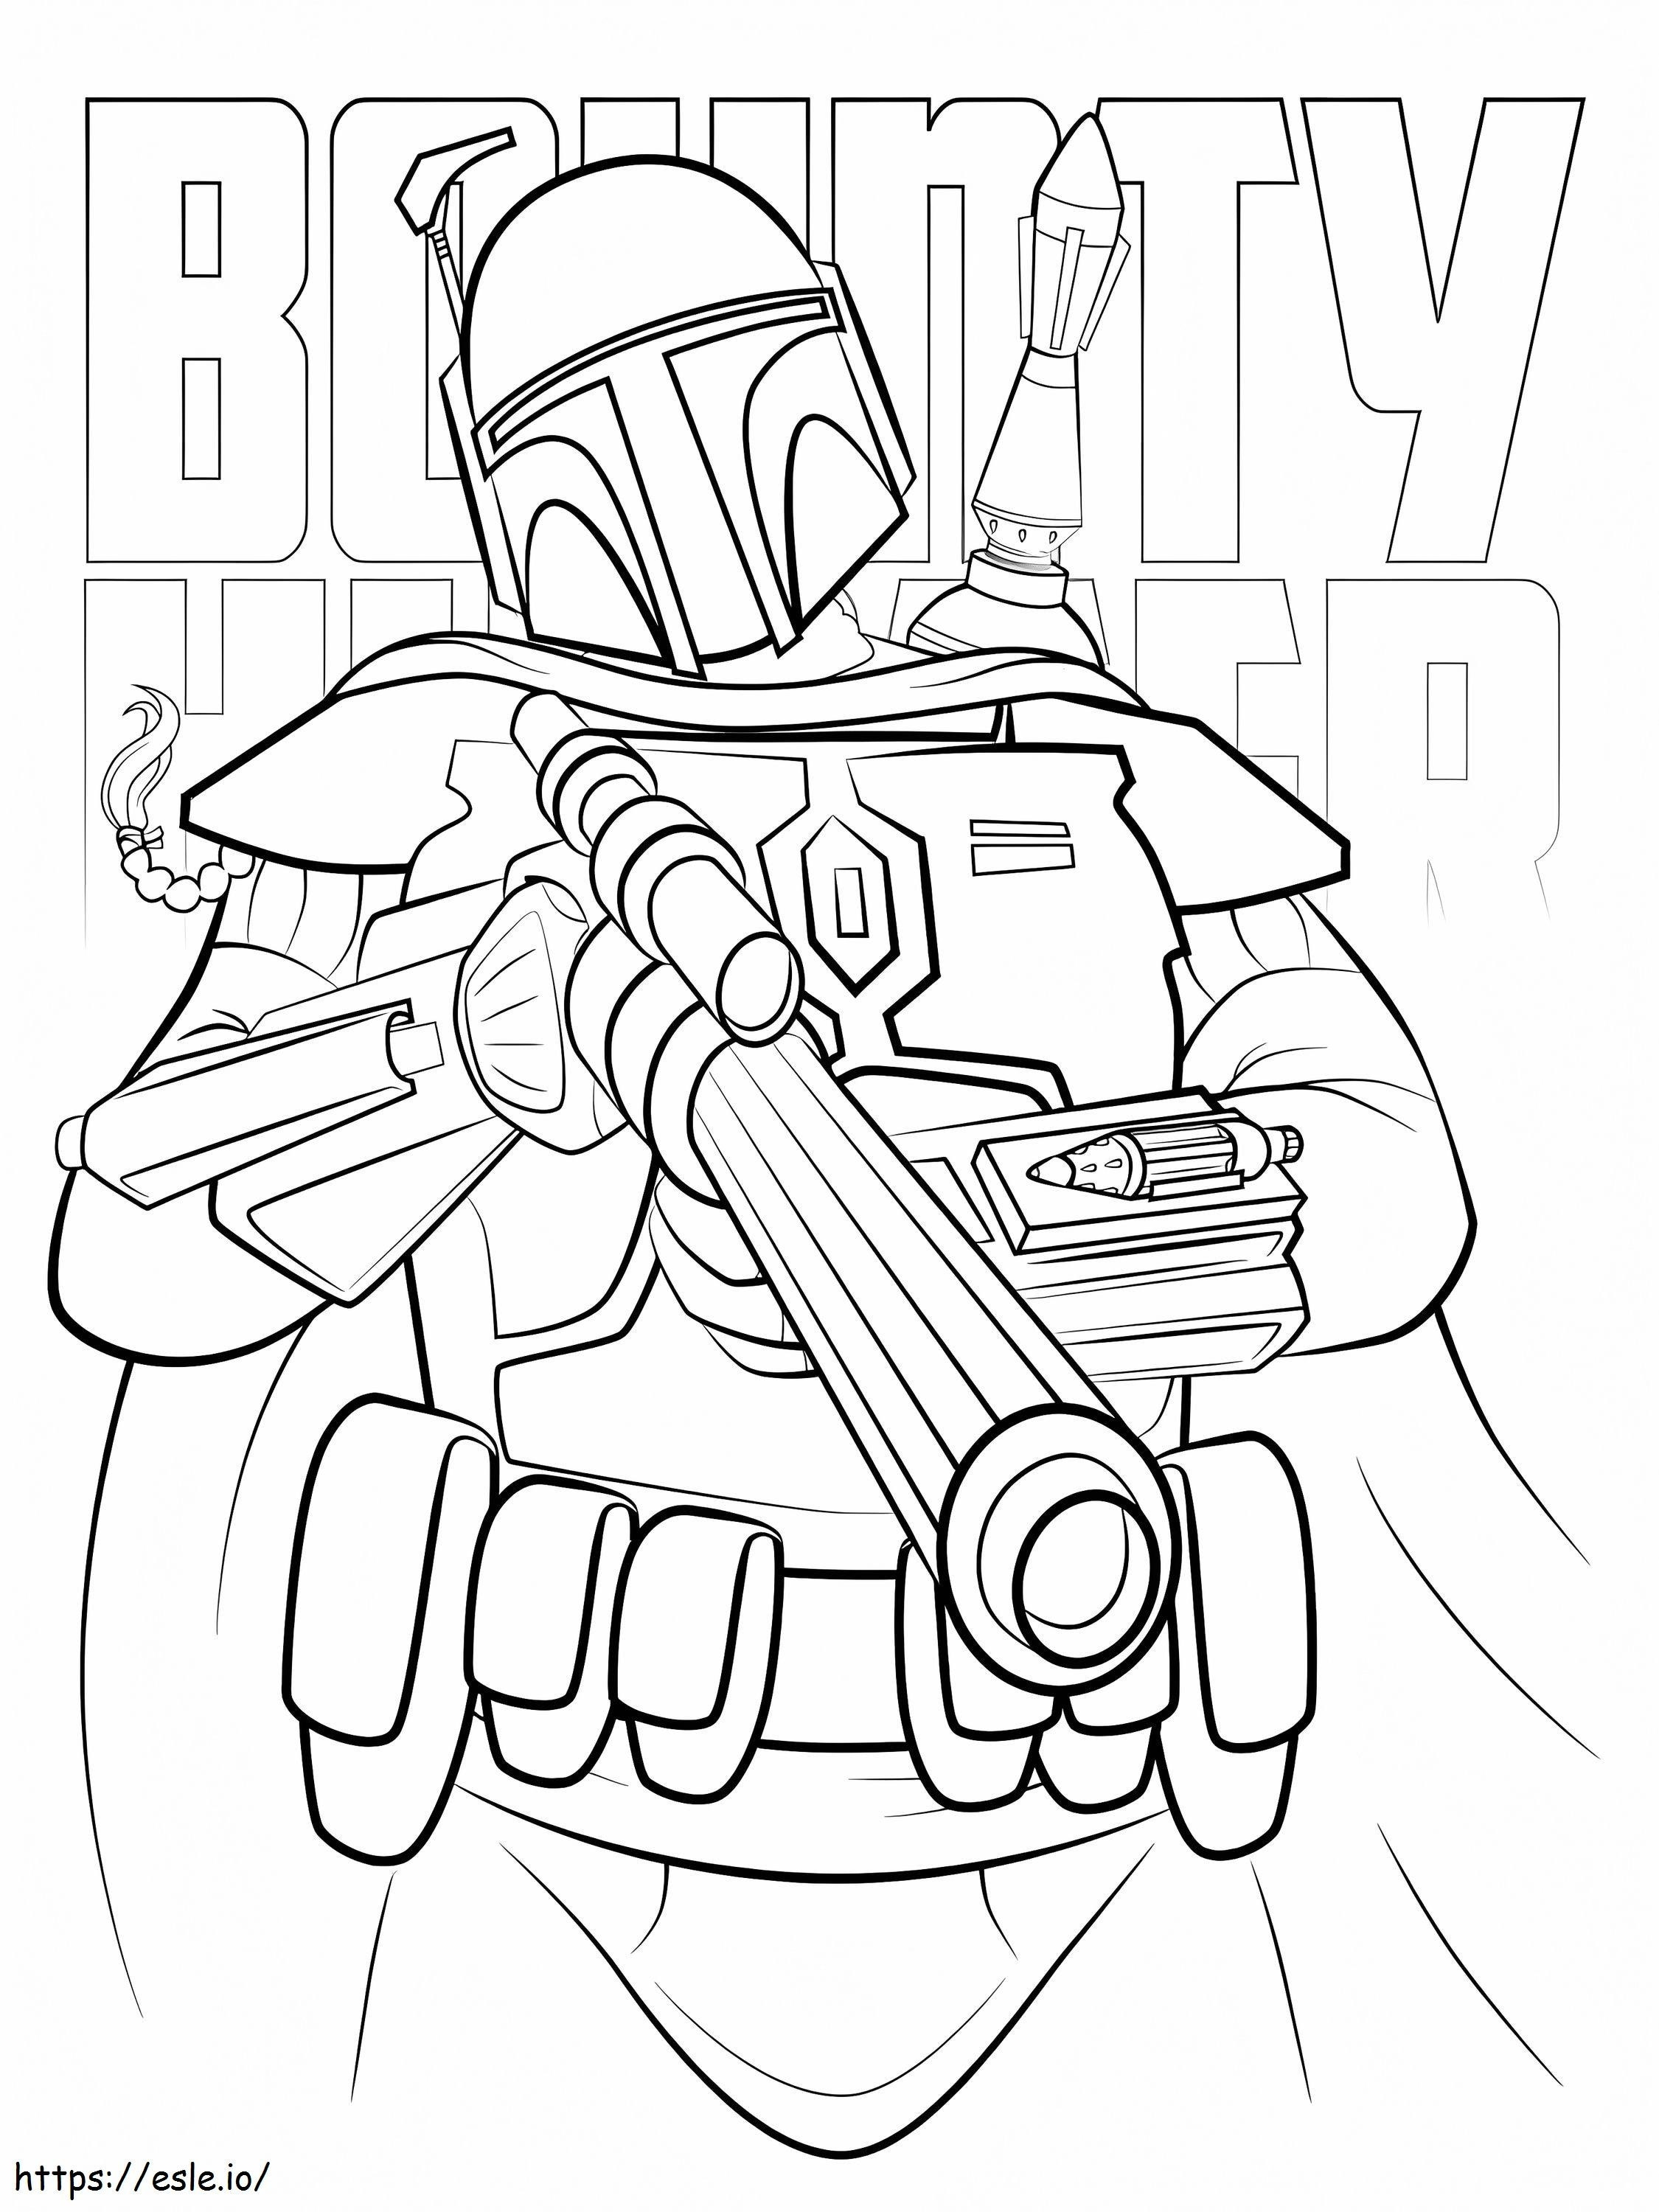 Boba Fett With Gun coloring page